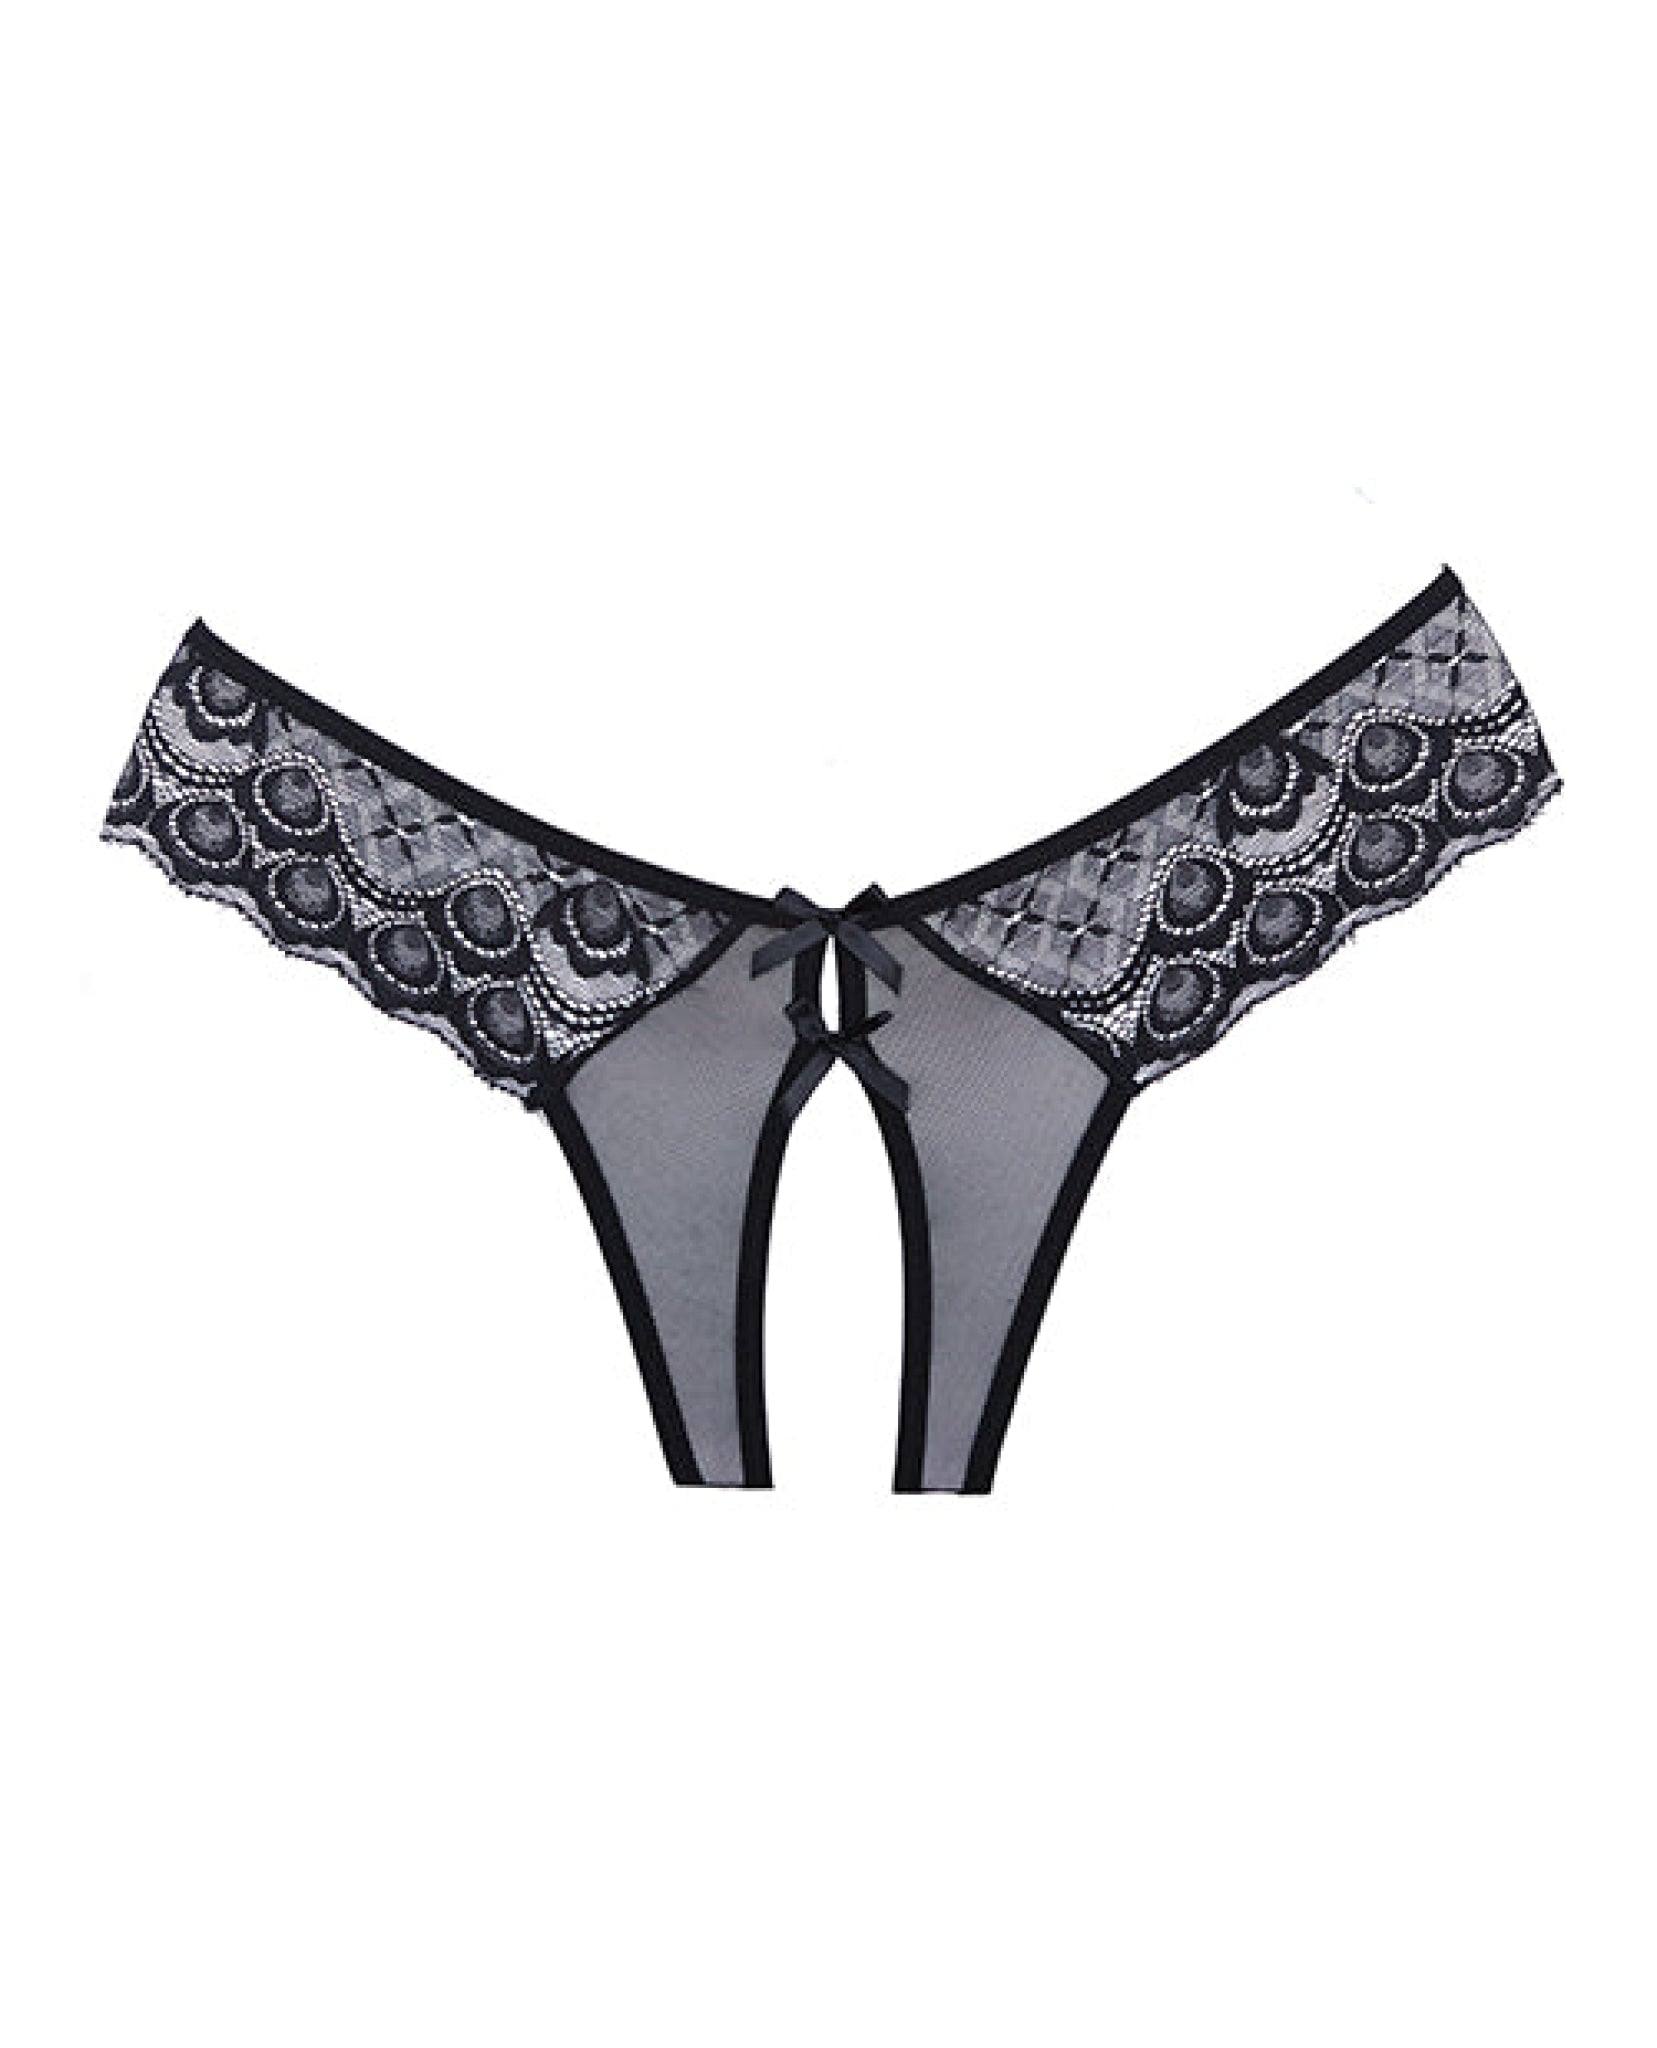 Adore Foreplay Lace & Mesh Front Open Panty Black O-s Allure